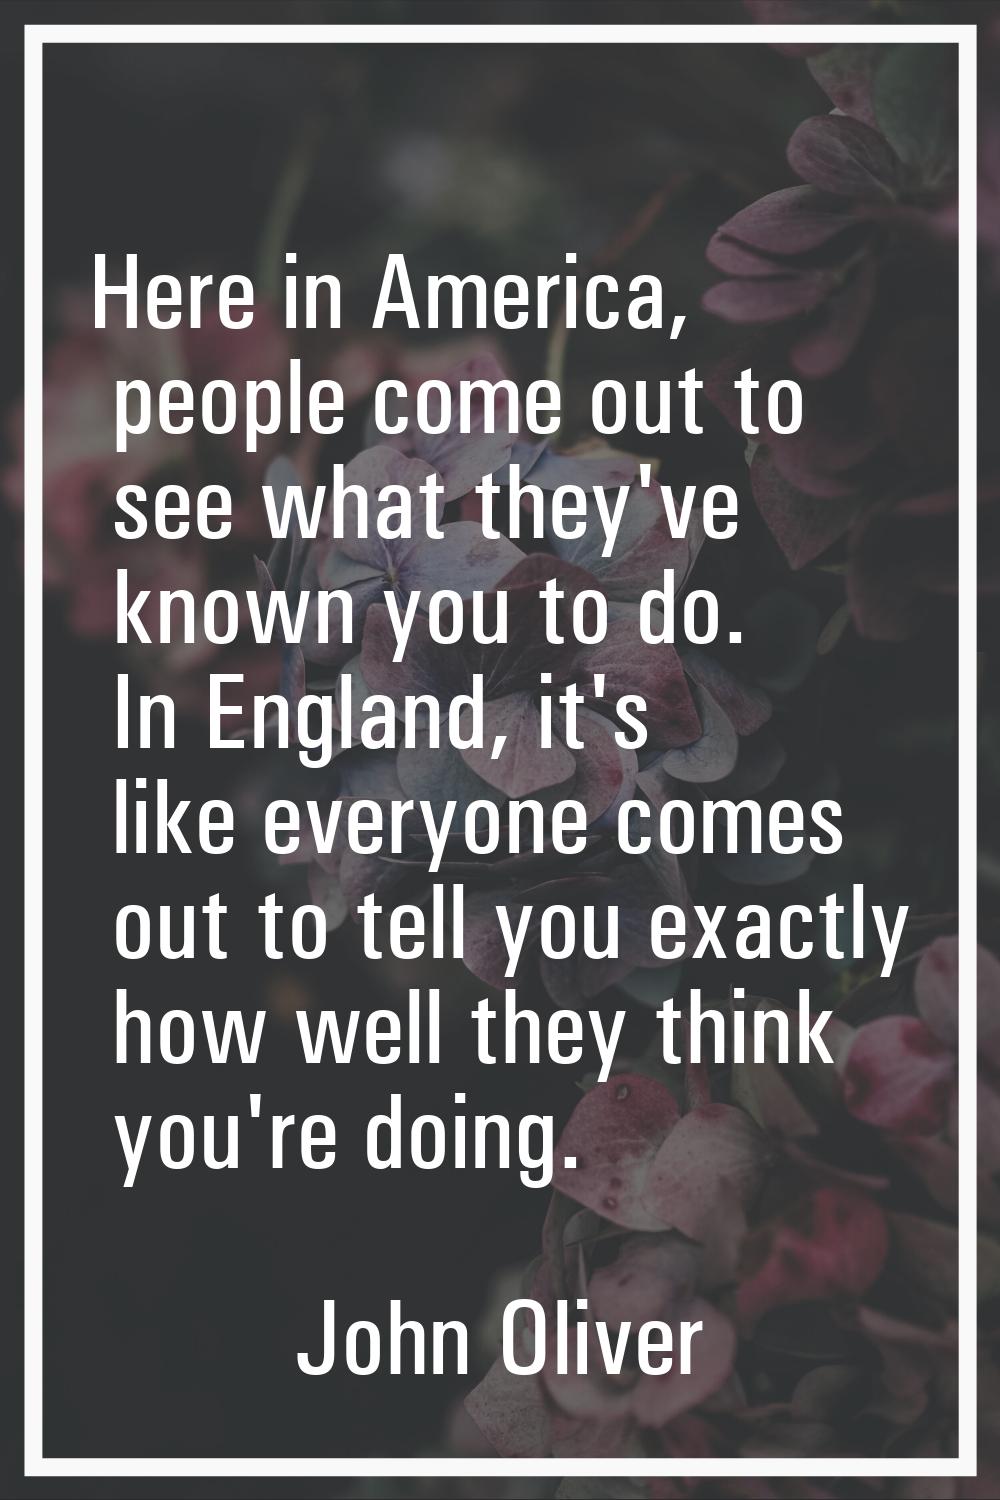 Here in America, people come out to see what they've known you to do. In England, it's like everyon